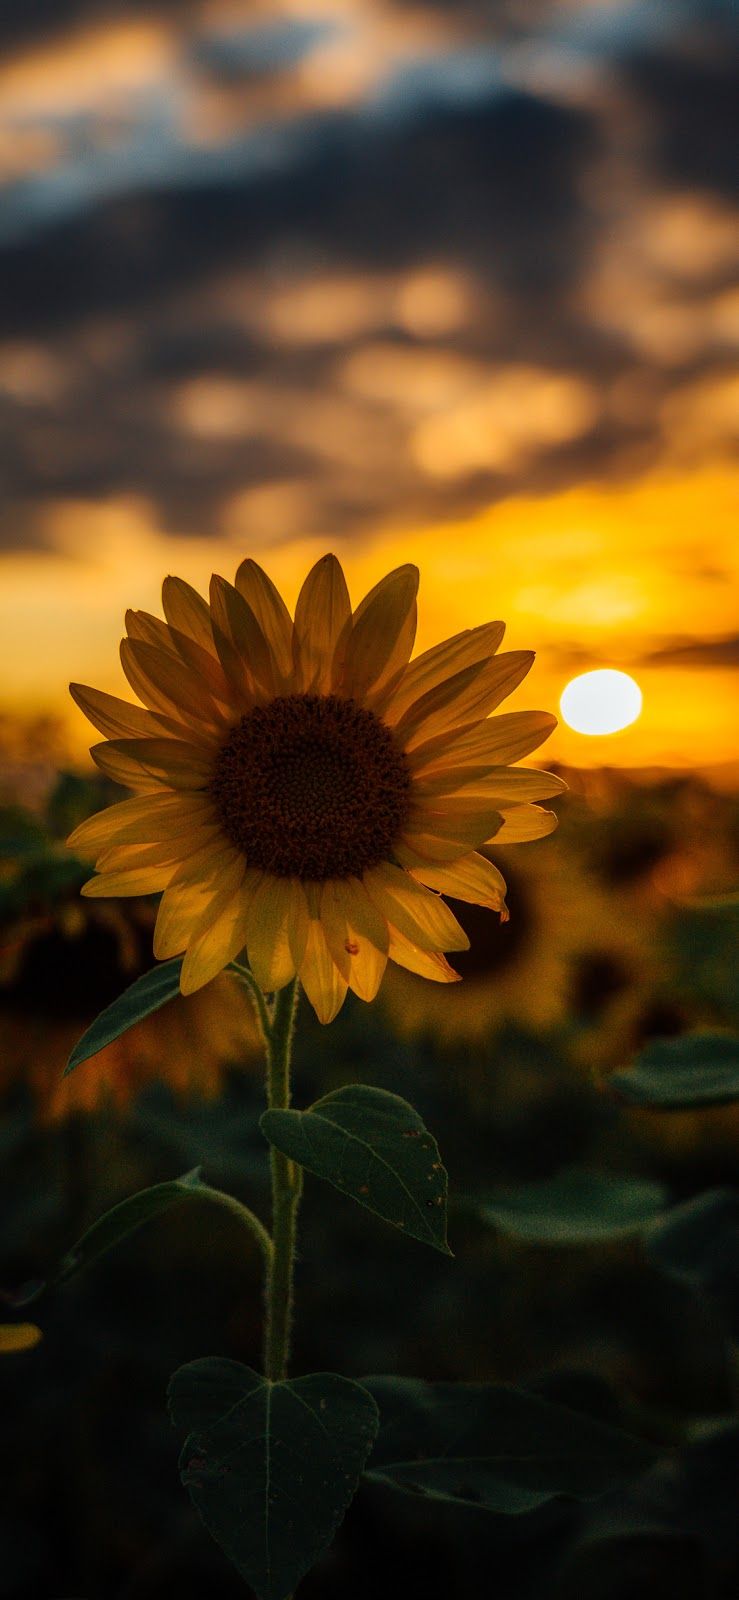 Sunflower wallpaper iphone x #wallpaper #iphone #android #background #followme. Sunflower iphone wallpaper, Sunflower wallpaper, Beautiful wallpaper